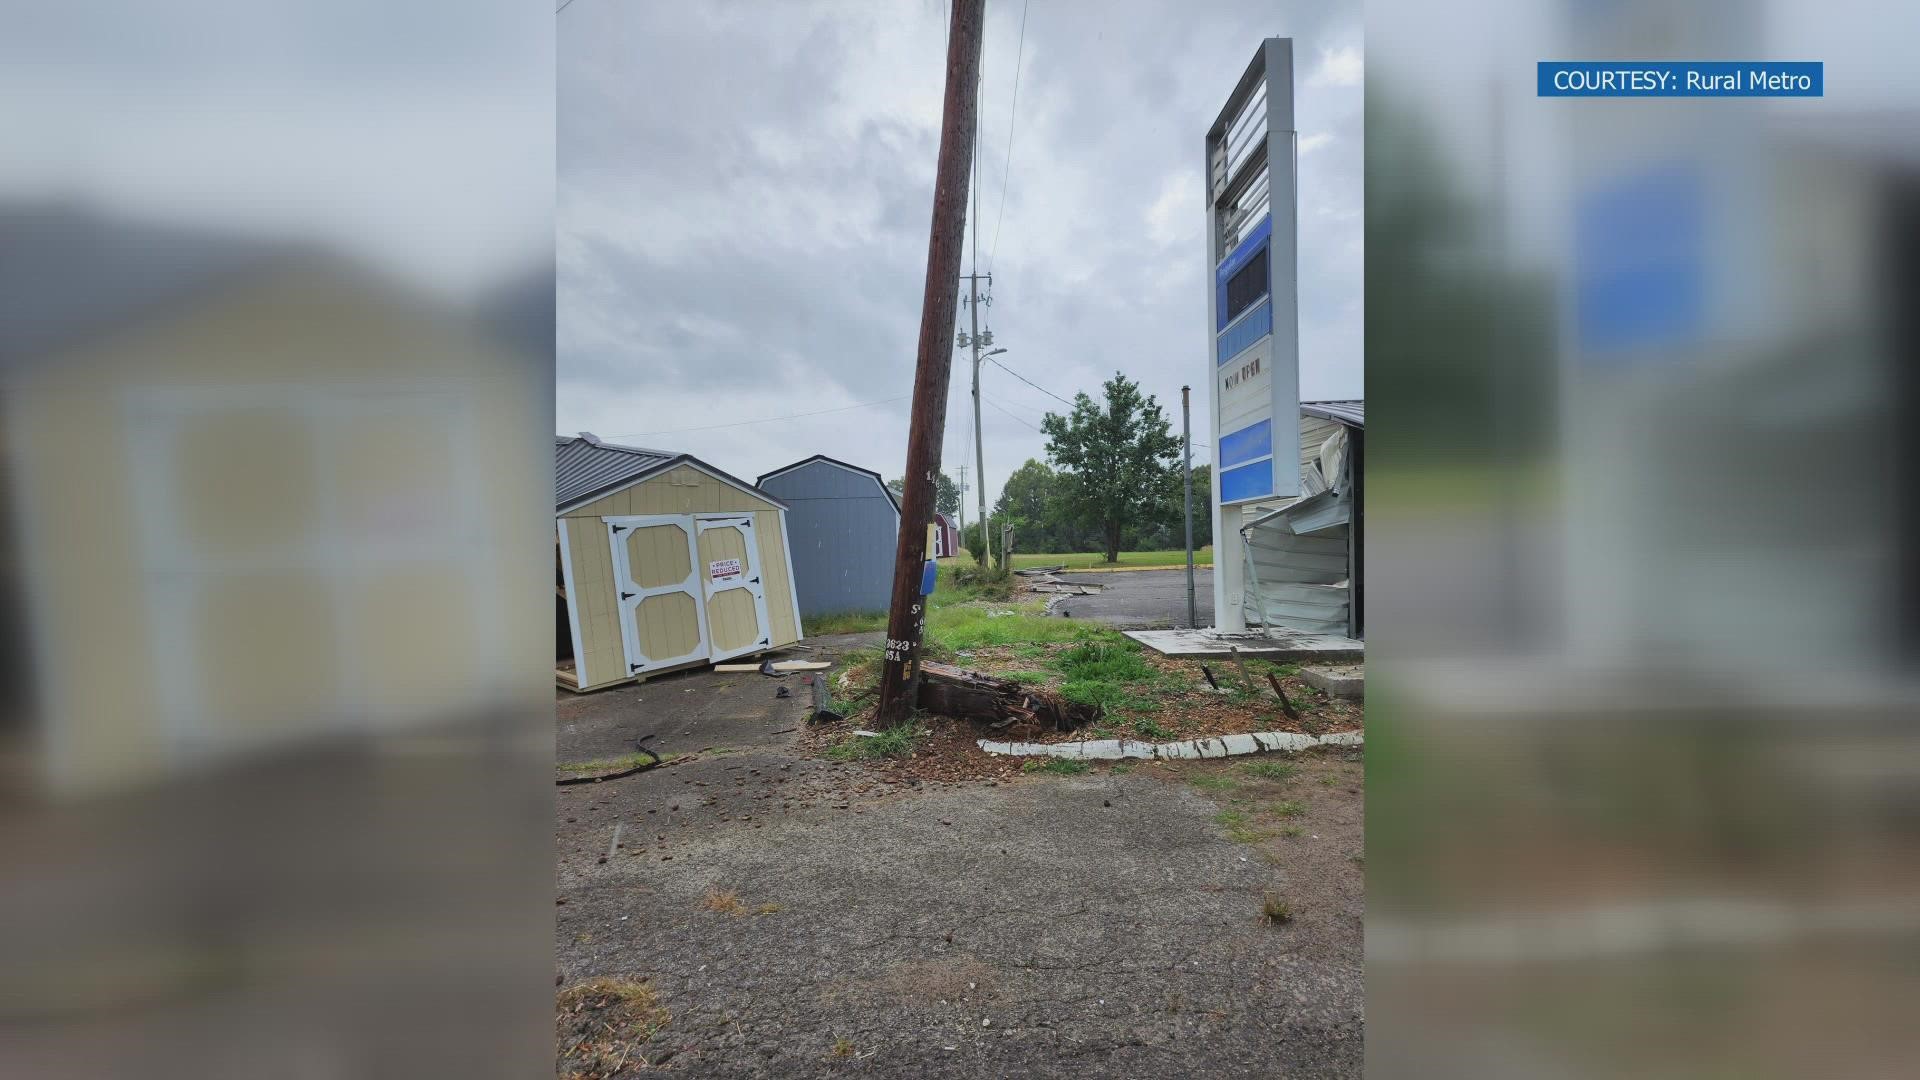 A car crashed into buildings near Clinton Highway and knocked down a power pole.